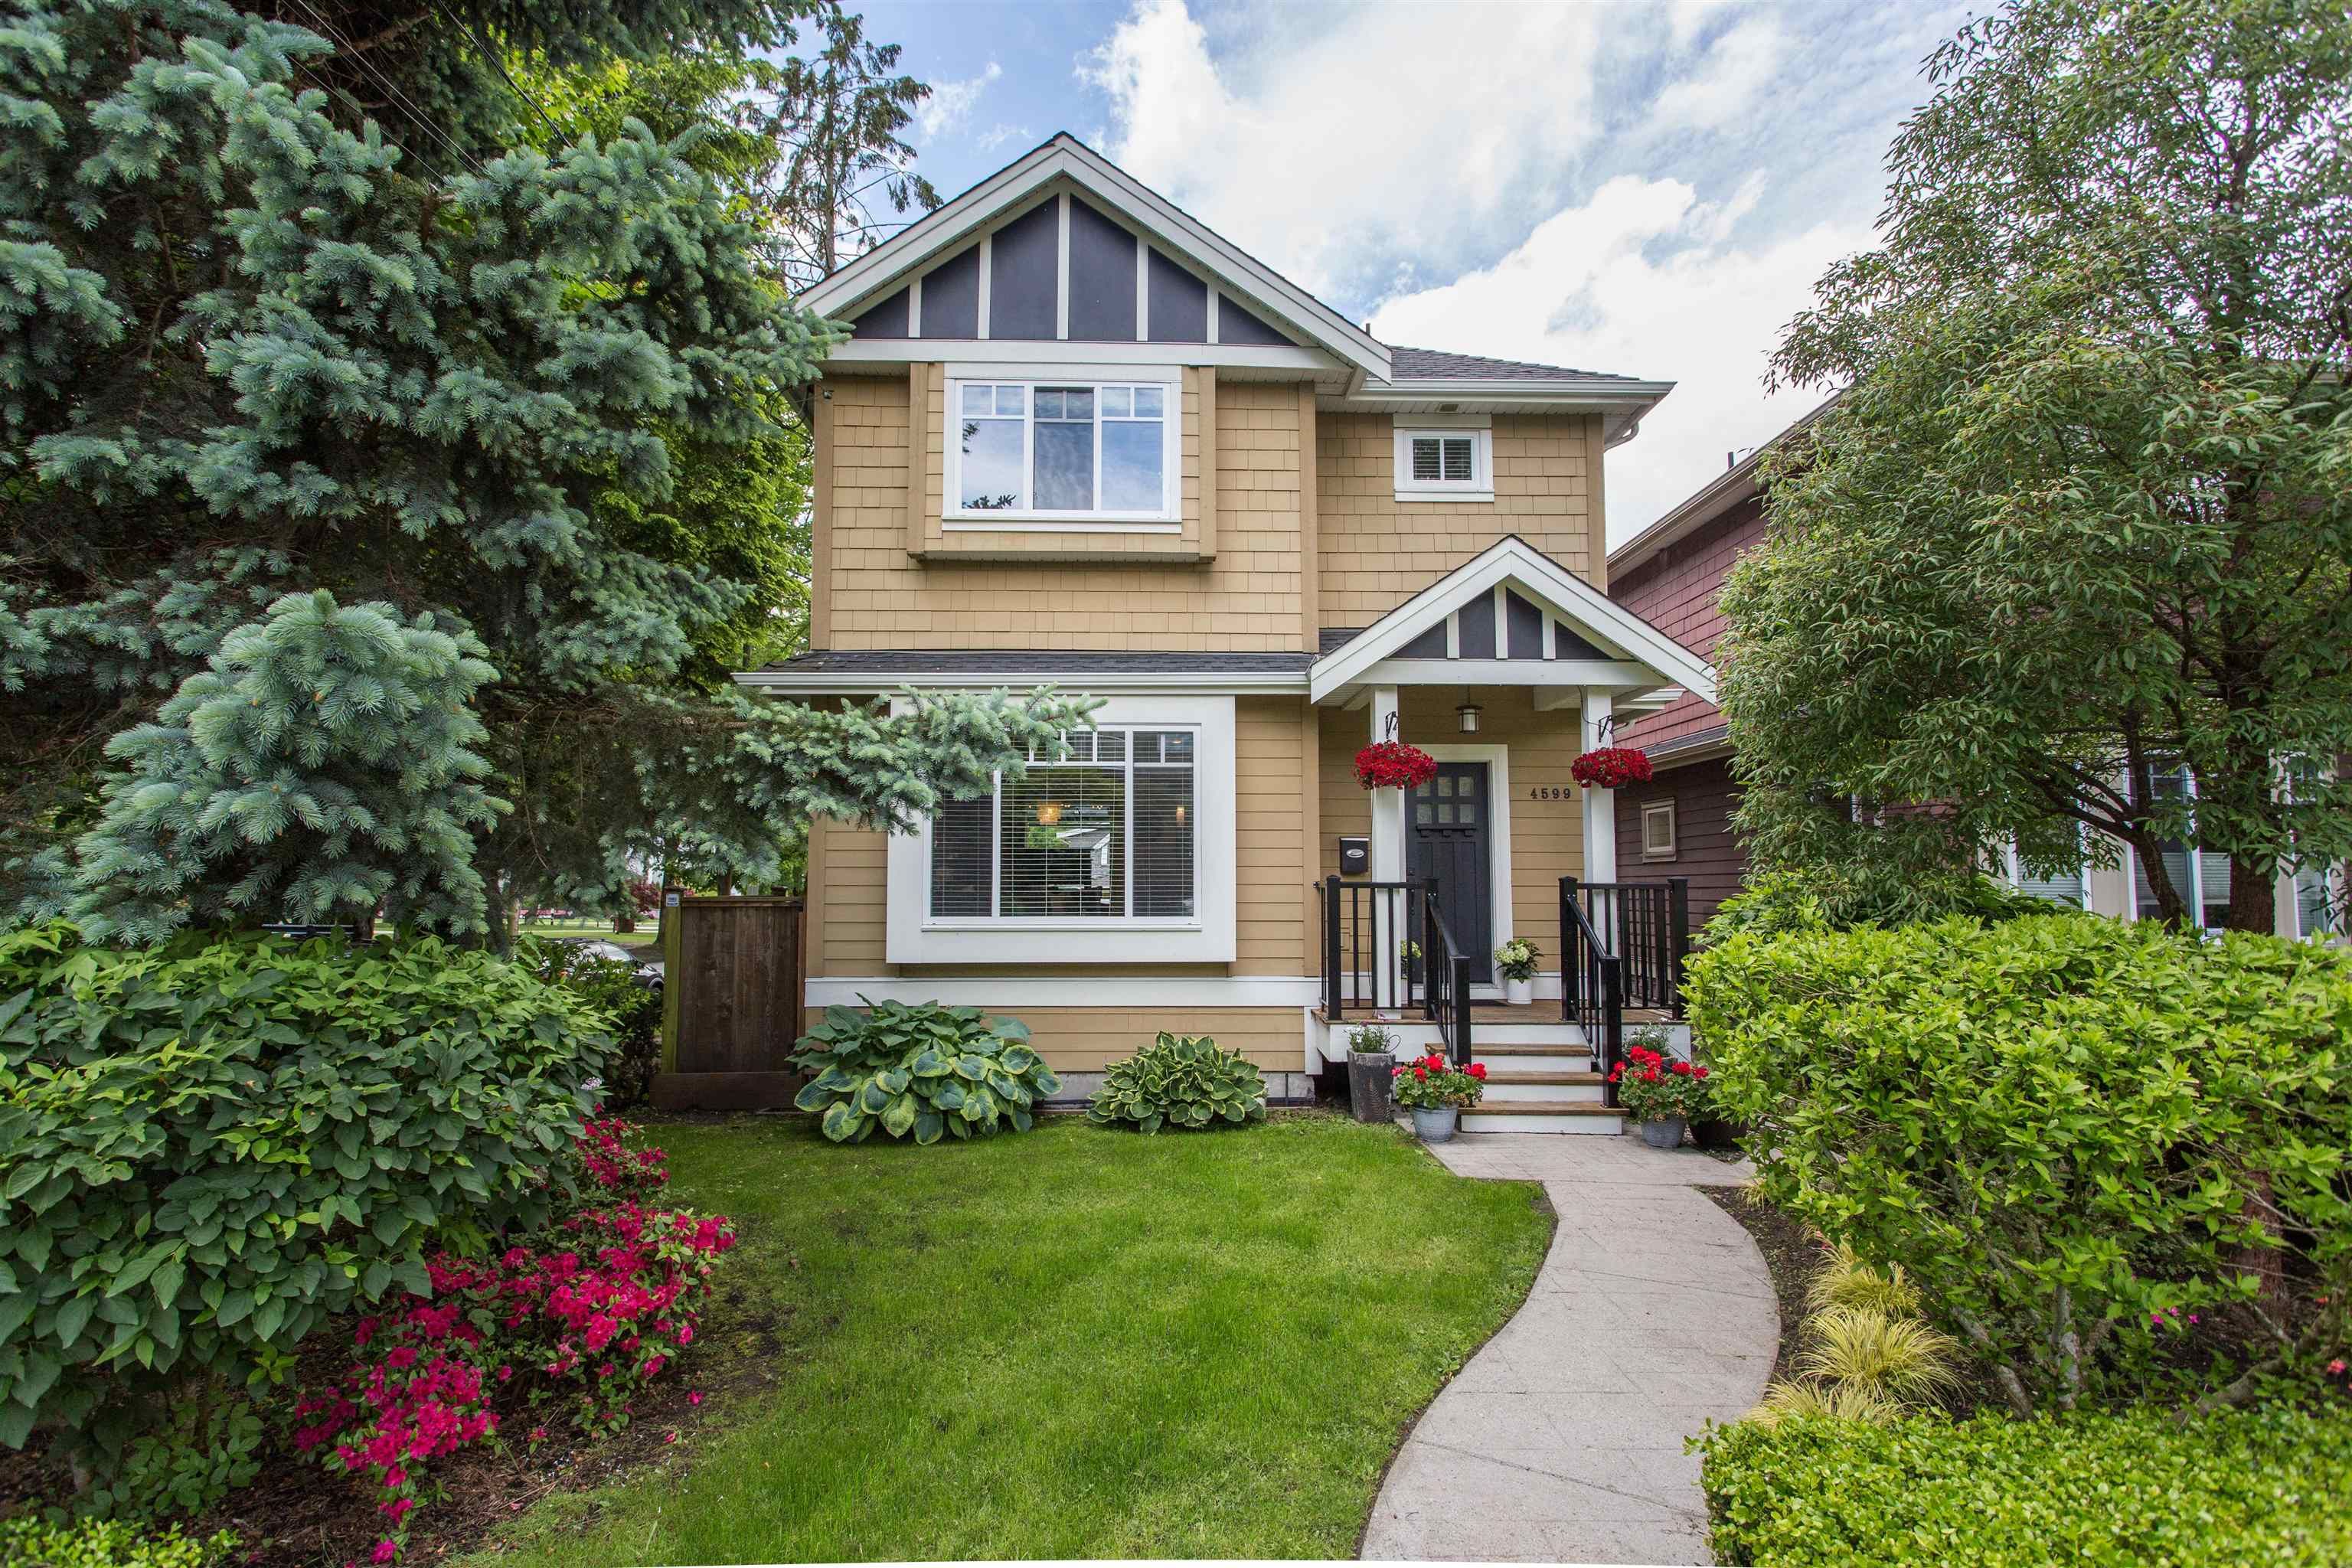 Open House on Sunday, June 26, 2022 2:00PM - 4:00PM